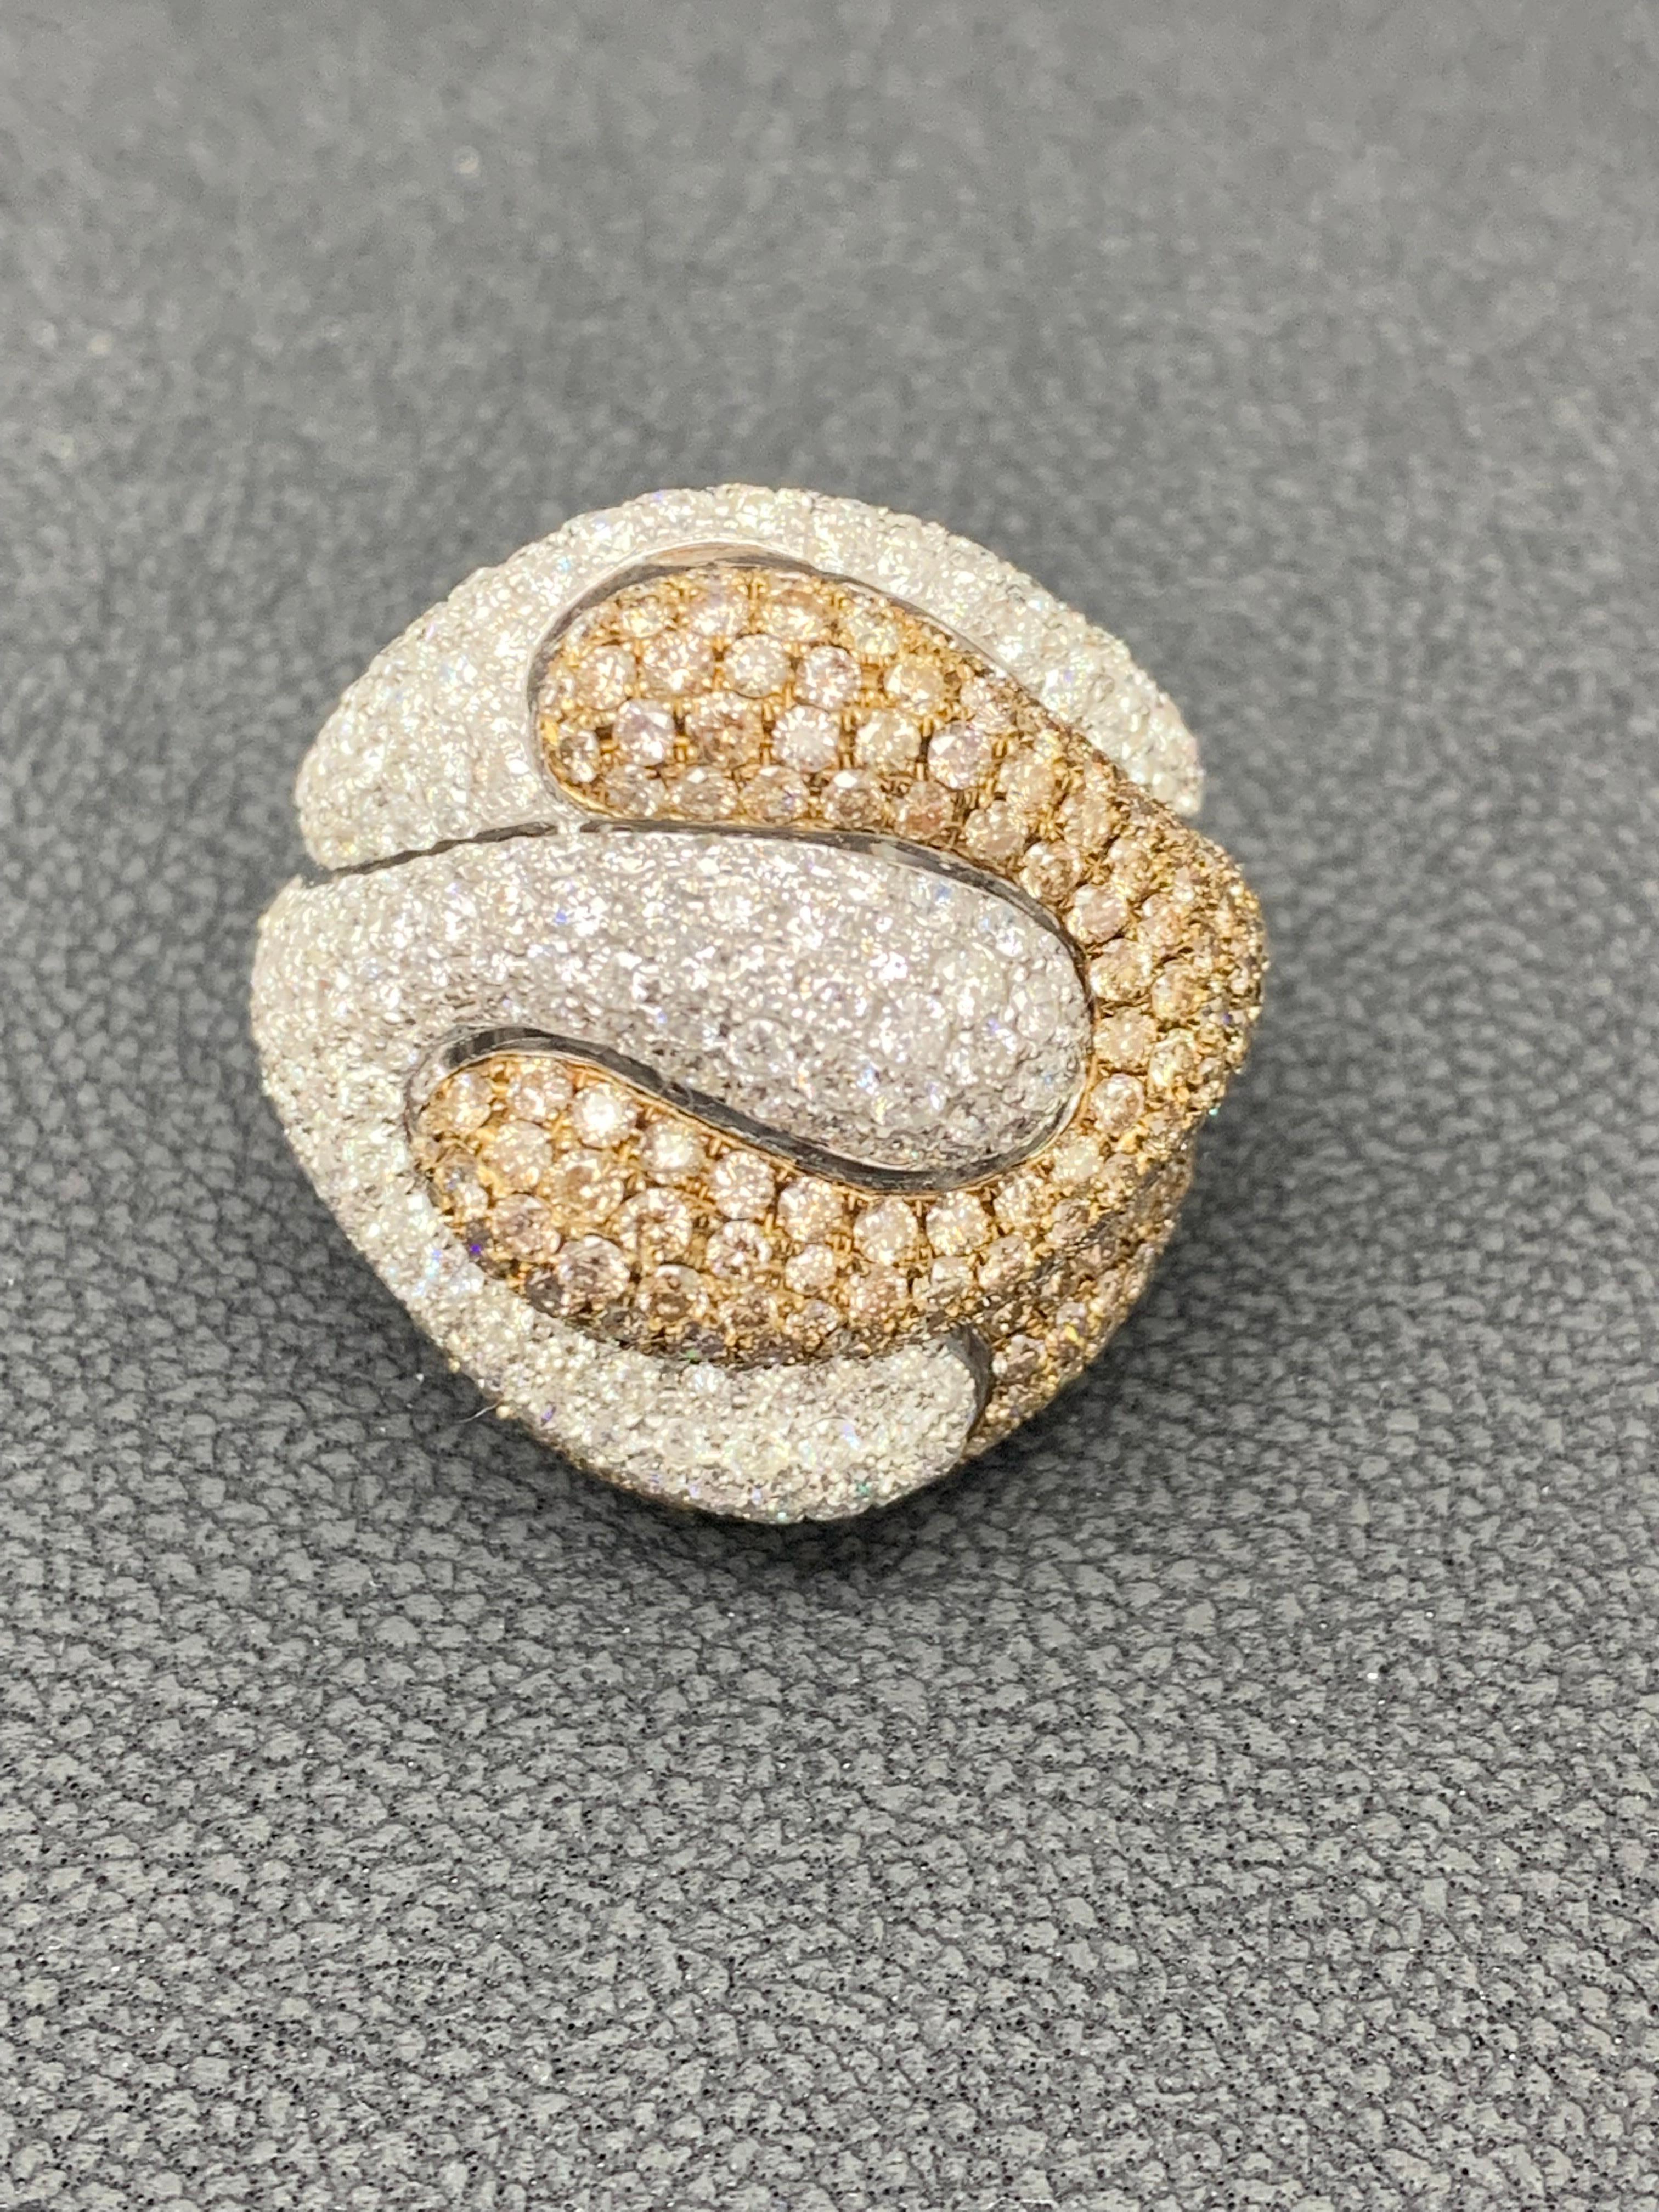 Exquisite Fancy Wide Dome Cocktail Ring is adorned by Natural Fancy Brown Orange Round Cut Diamonds expertly placed
with brilliant round White Diamonds throughout the Dome shape band.  A total 3.50 carat weight of brown diamonds and 3.40 carat